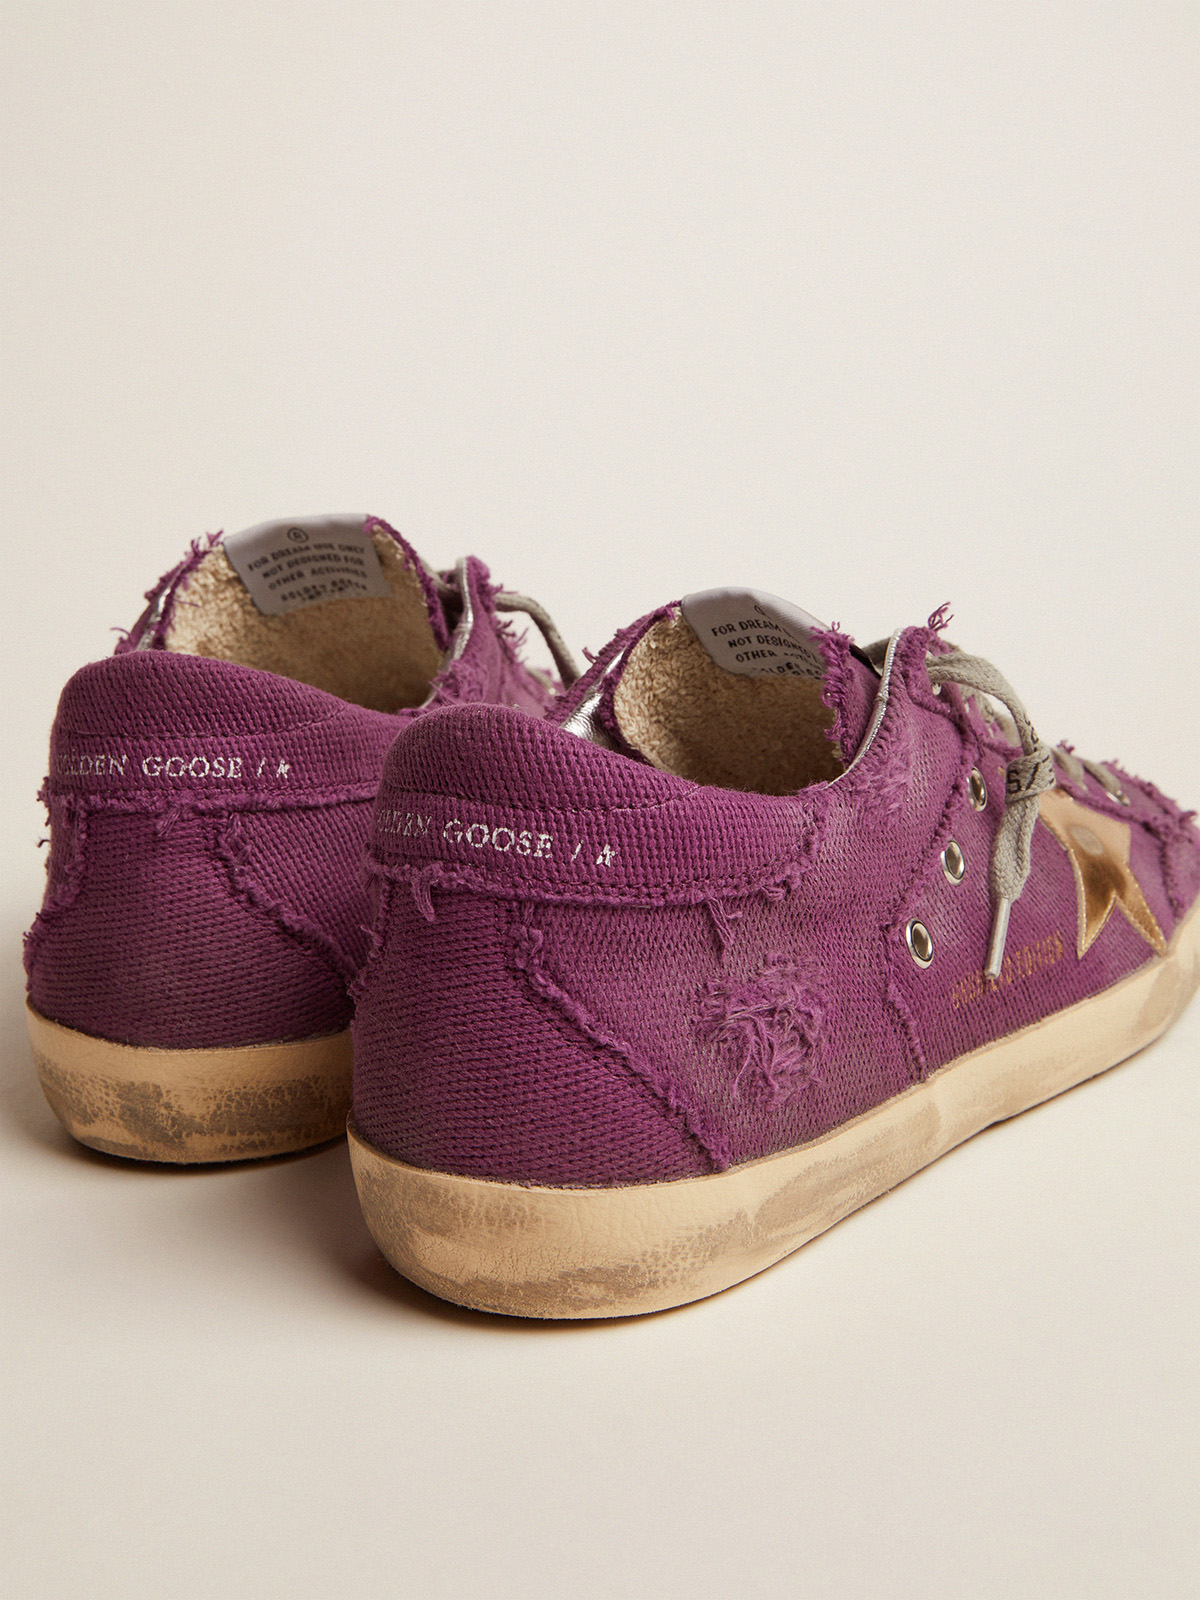 Women\'s Super-Star LAB sneakers in purple distressed canvas with gold star  | Golden Goose